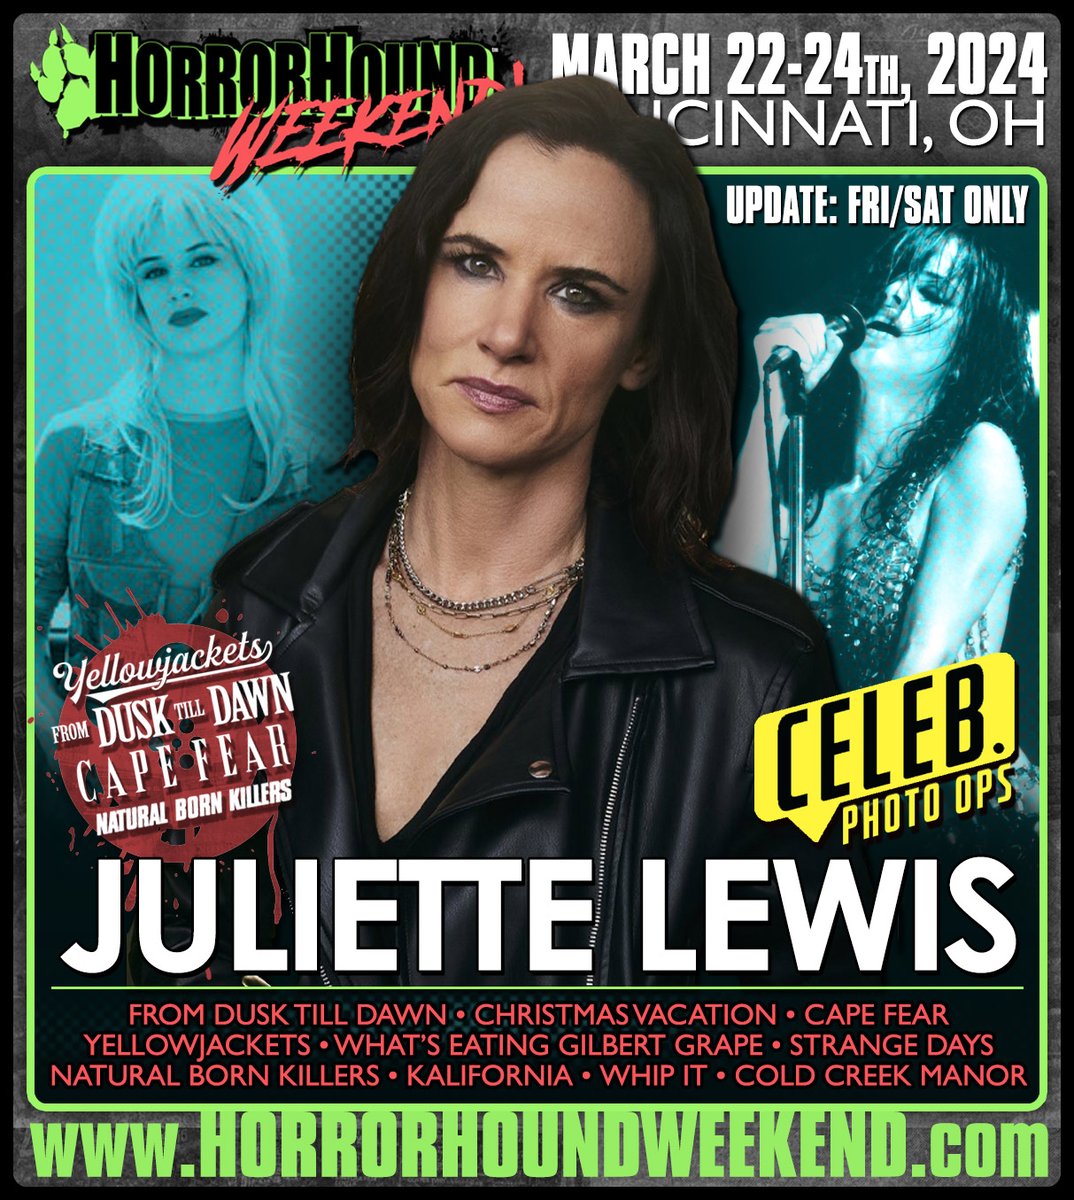 REMINDER that Juliette Lewis is appearing FRIDAY and SATURDAY only. HorrorHound Weekend | horrorhoundweekend.com